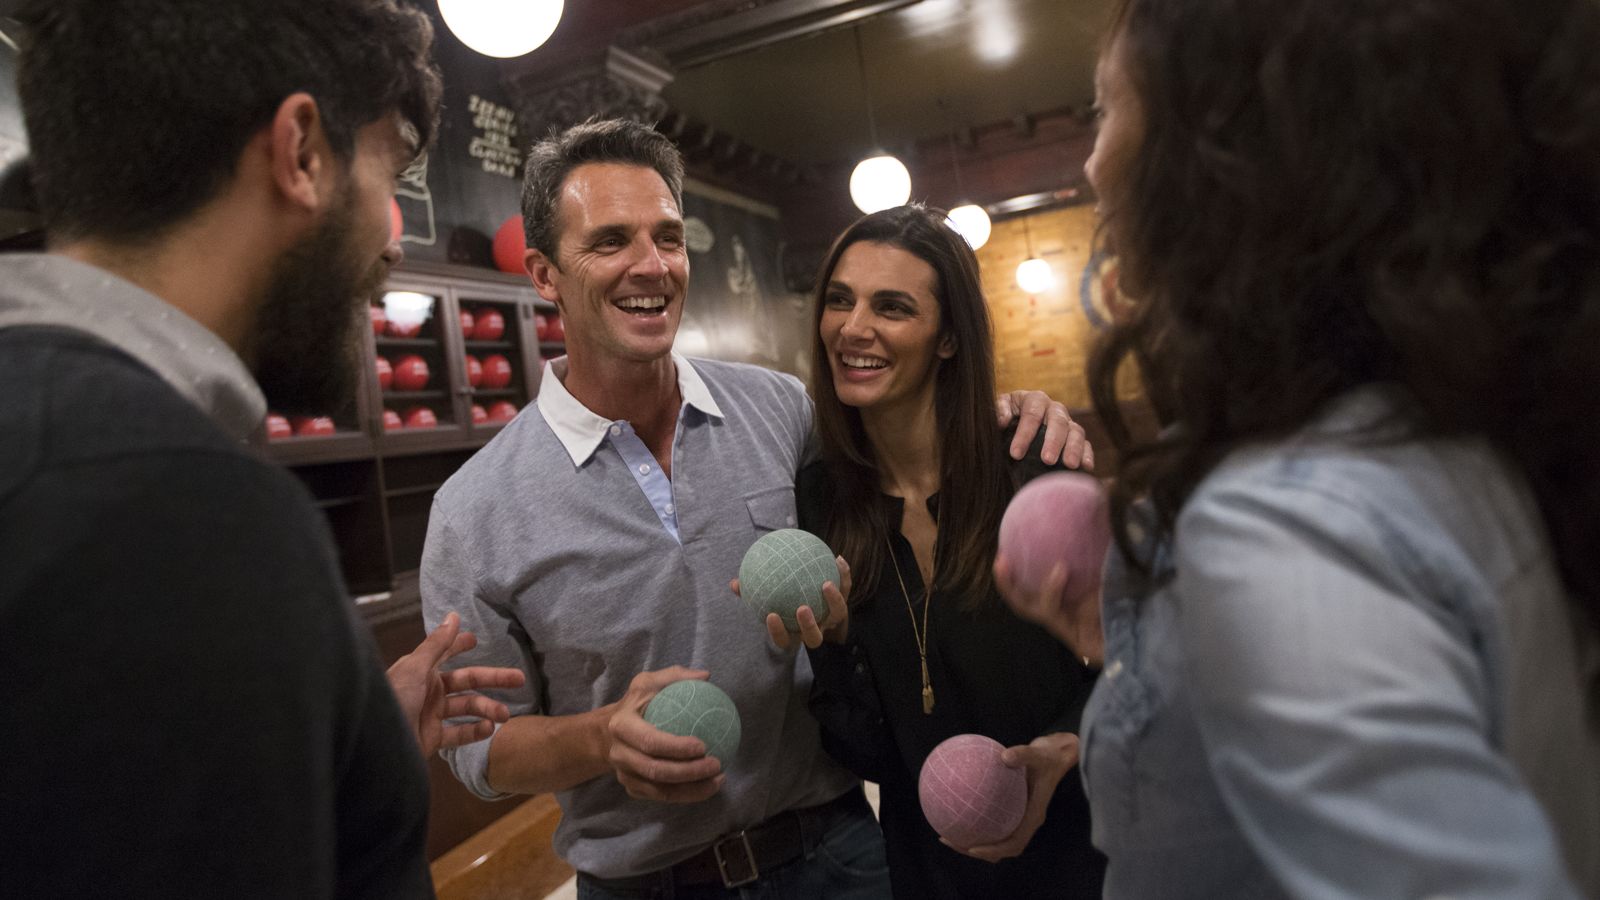 Chicago Athletic Association_Lifestyle_Game Room_Bocce Ball_Thomas Shelby